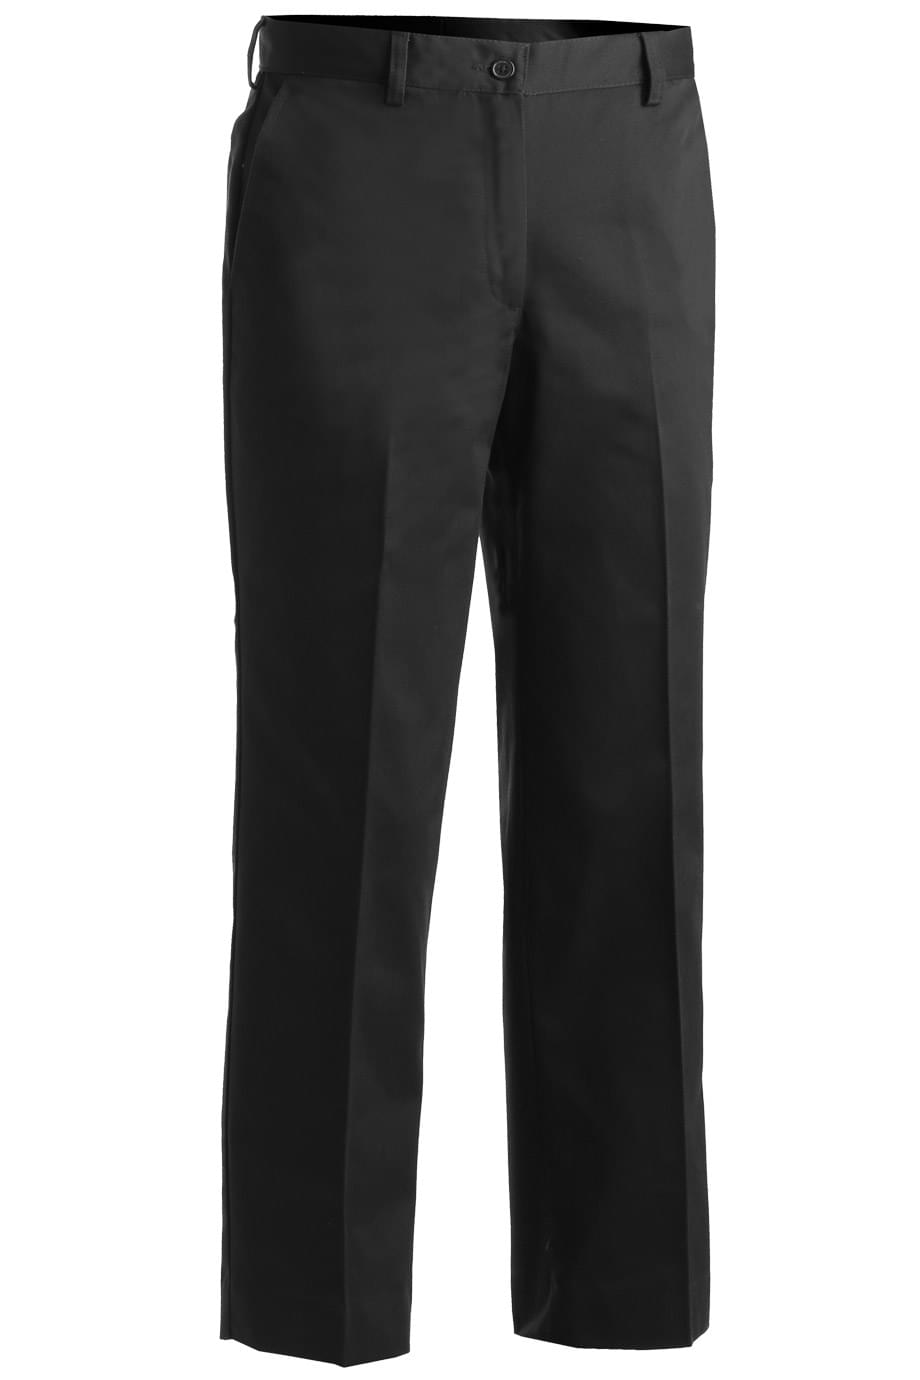 Buy Edwards Ladies Easy Fit Chino Flat Front Pant - Edwards Online at Best  price - FL